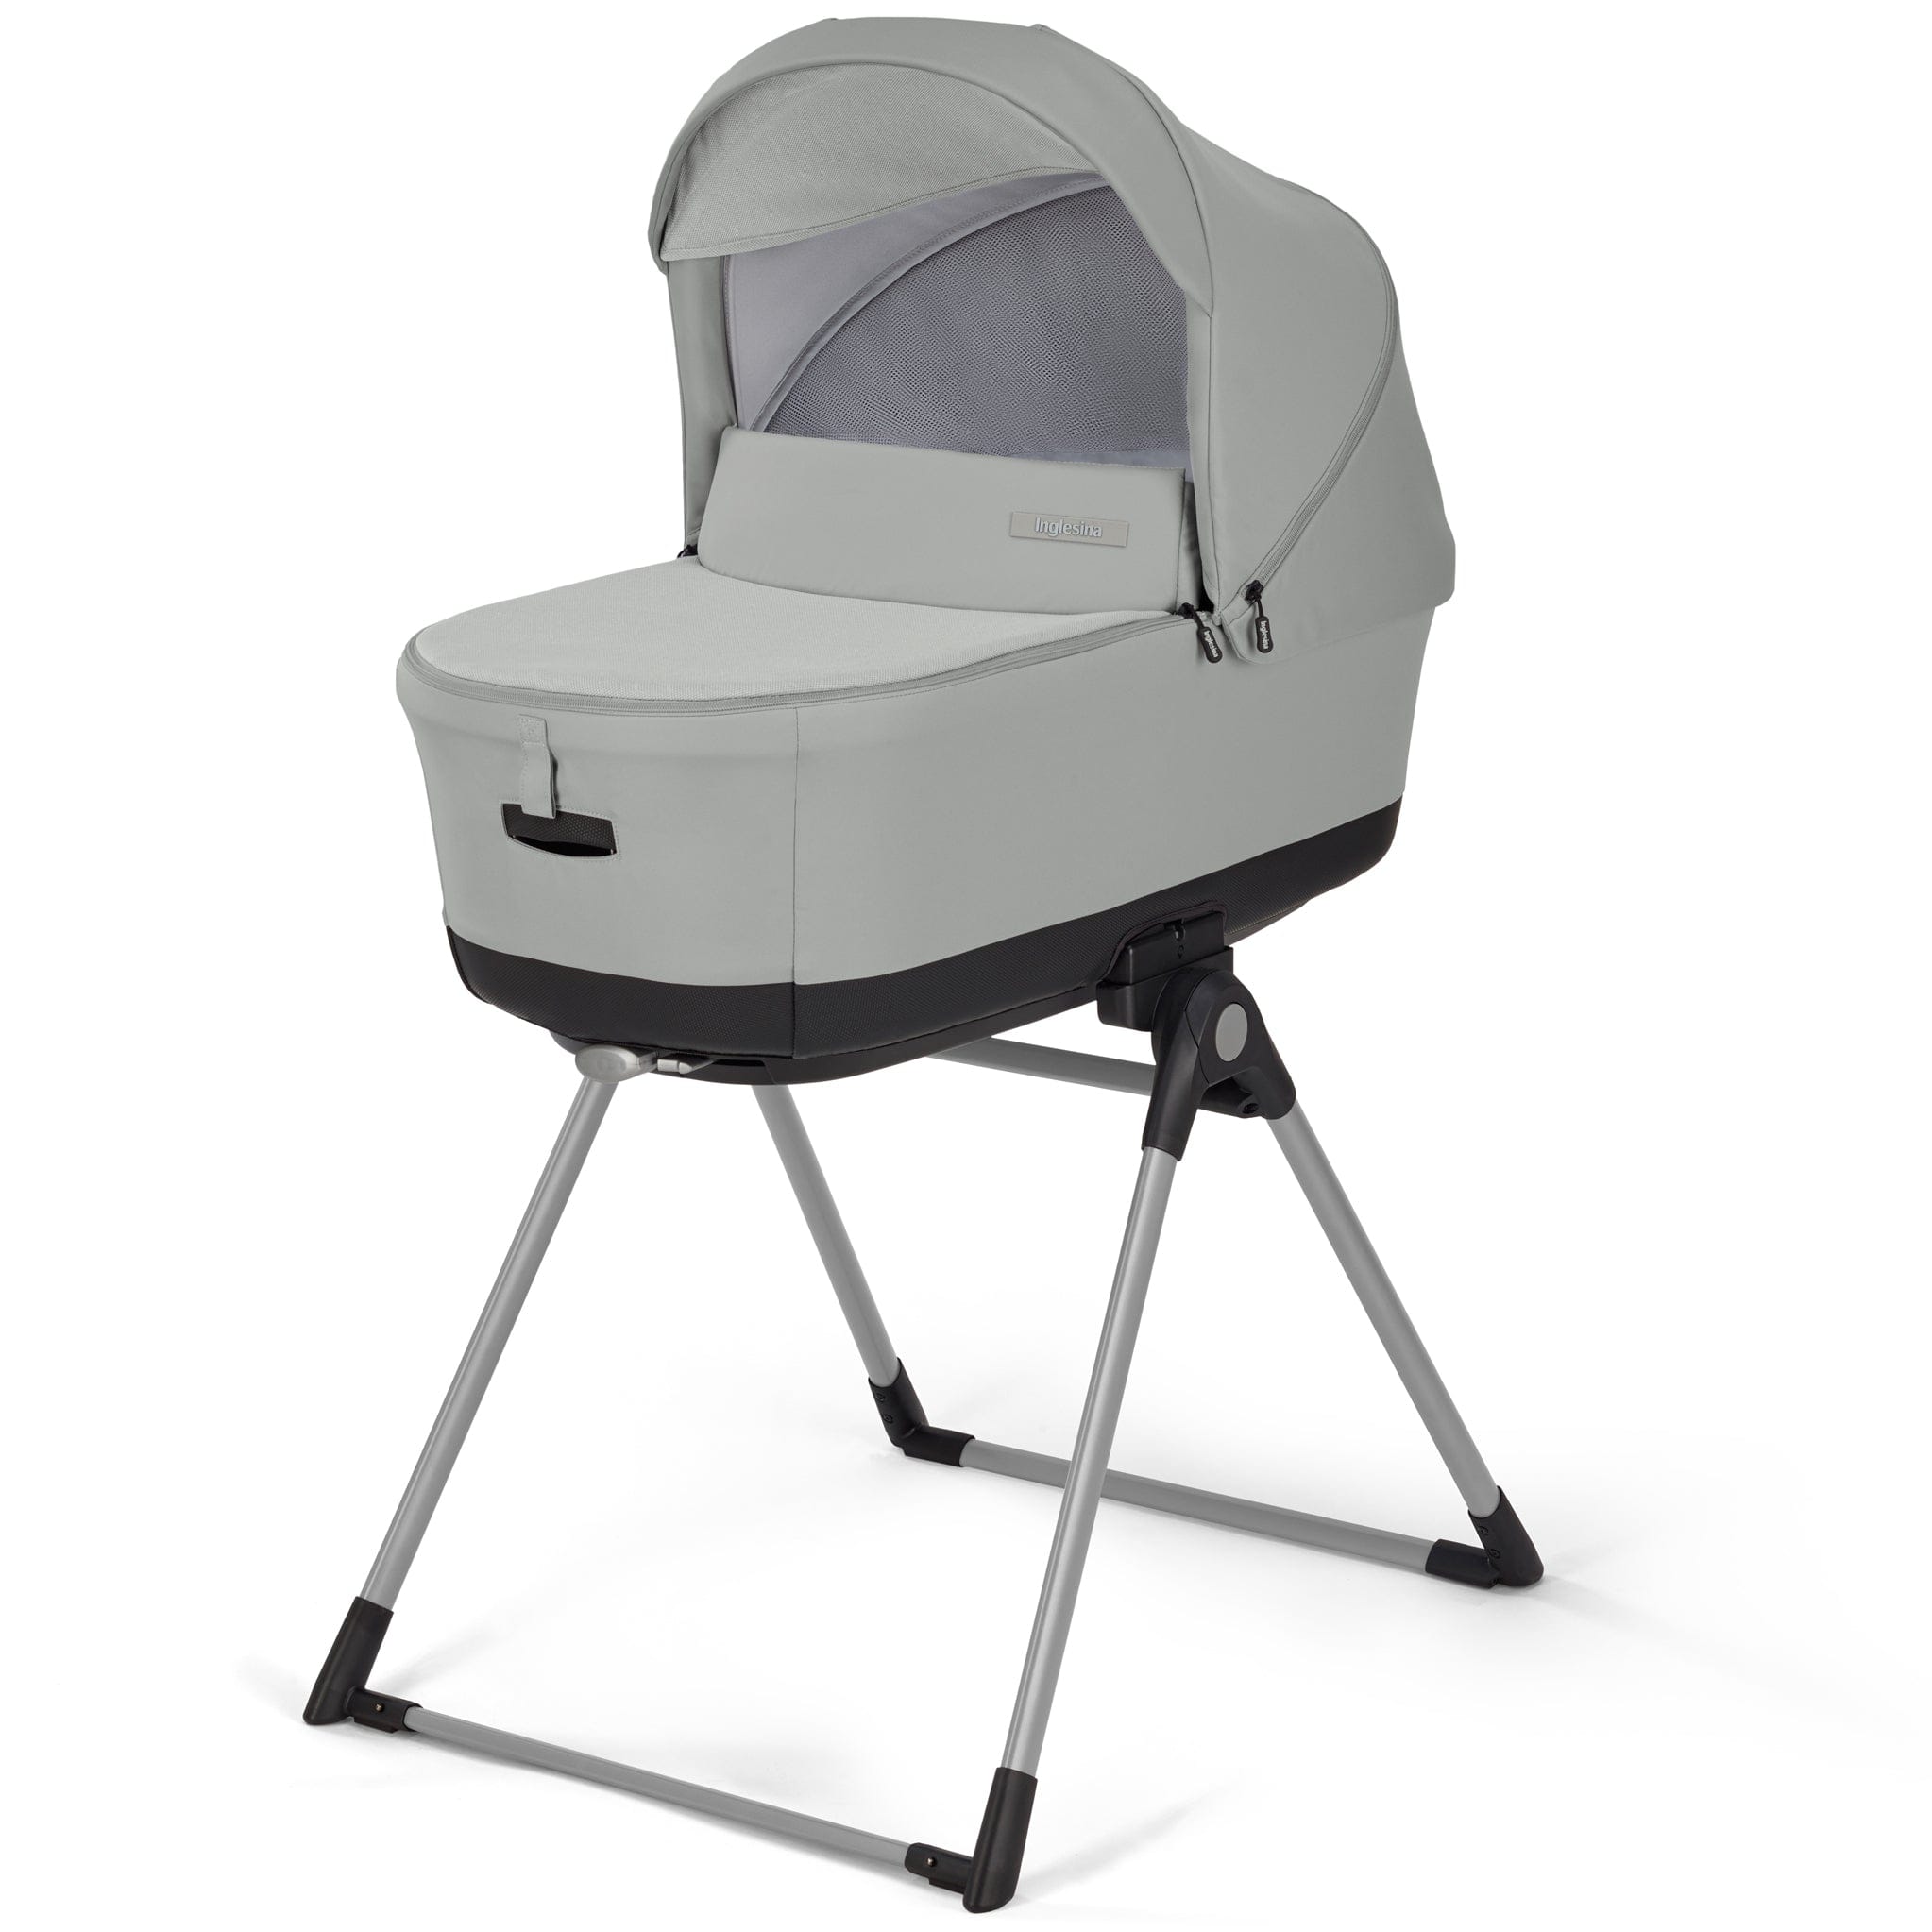 Inglesina travel systems Inglesina Electa System Quattro in Greenwich Silver with Darwin car seat and i-Size base ELC-GRE-SIL